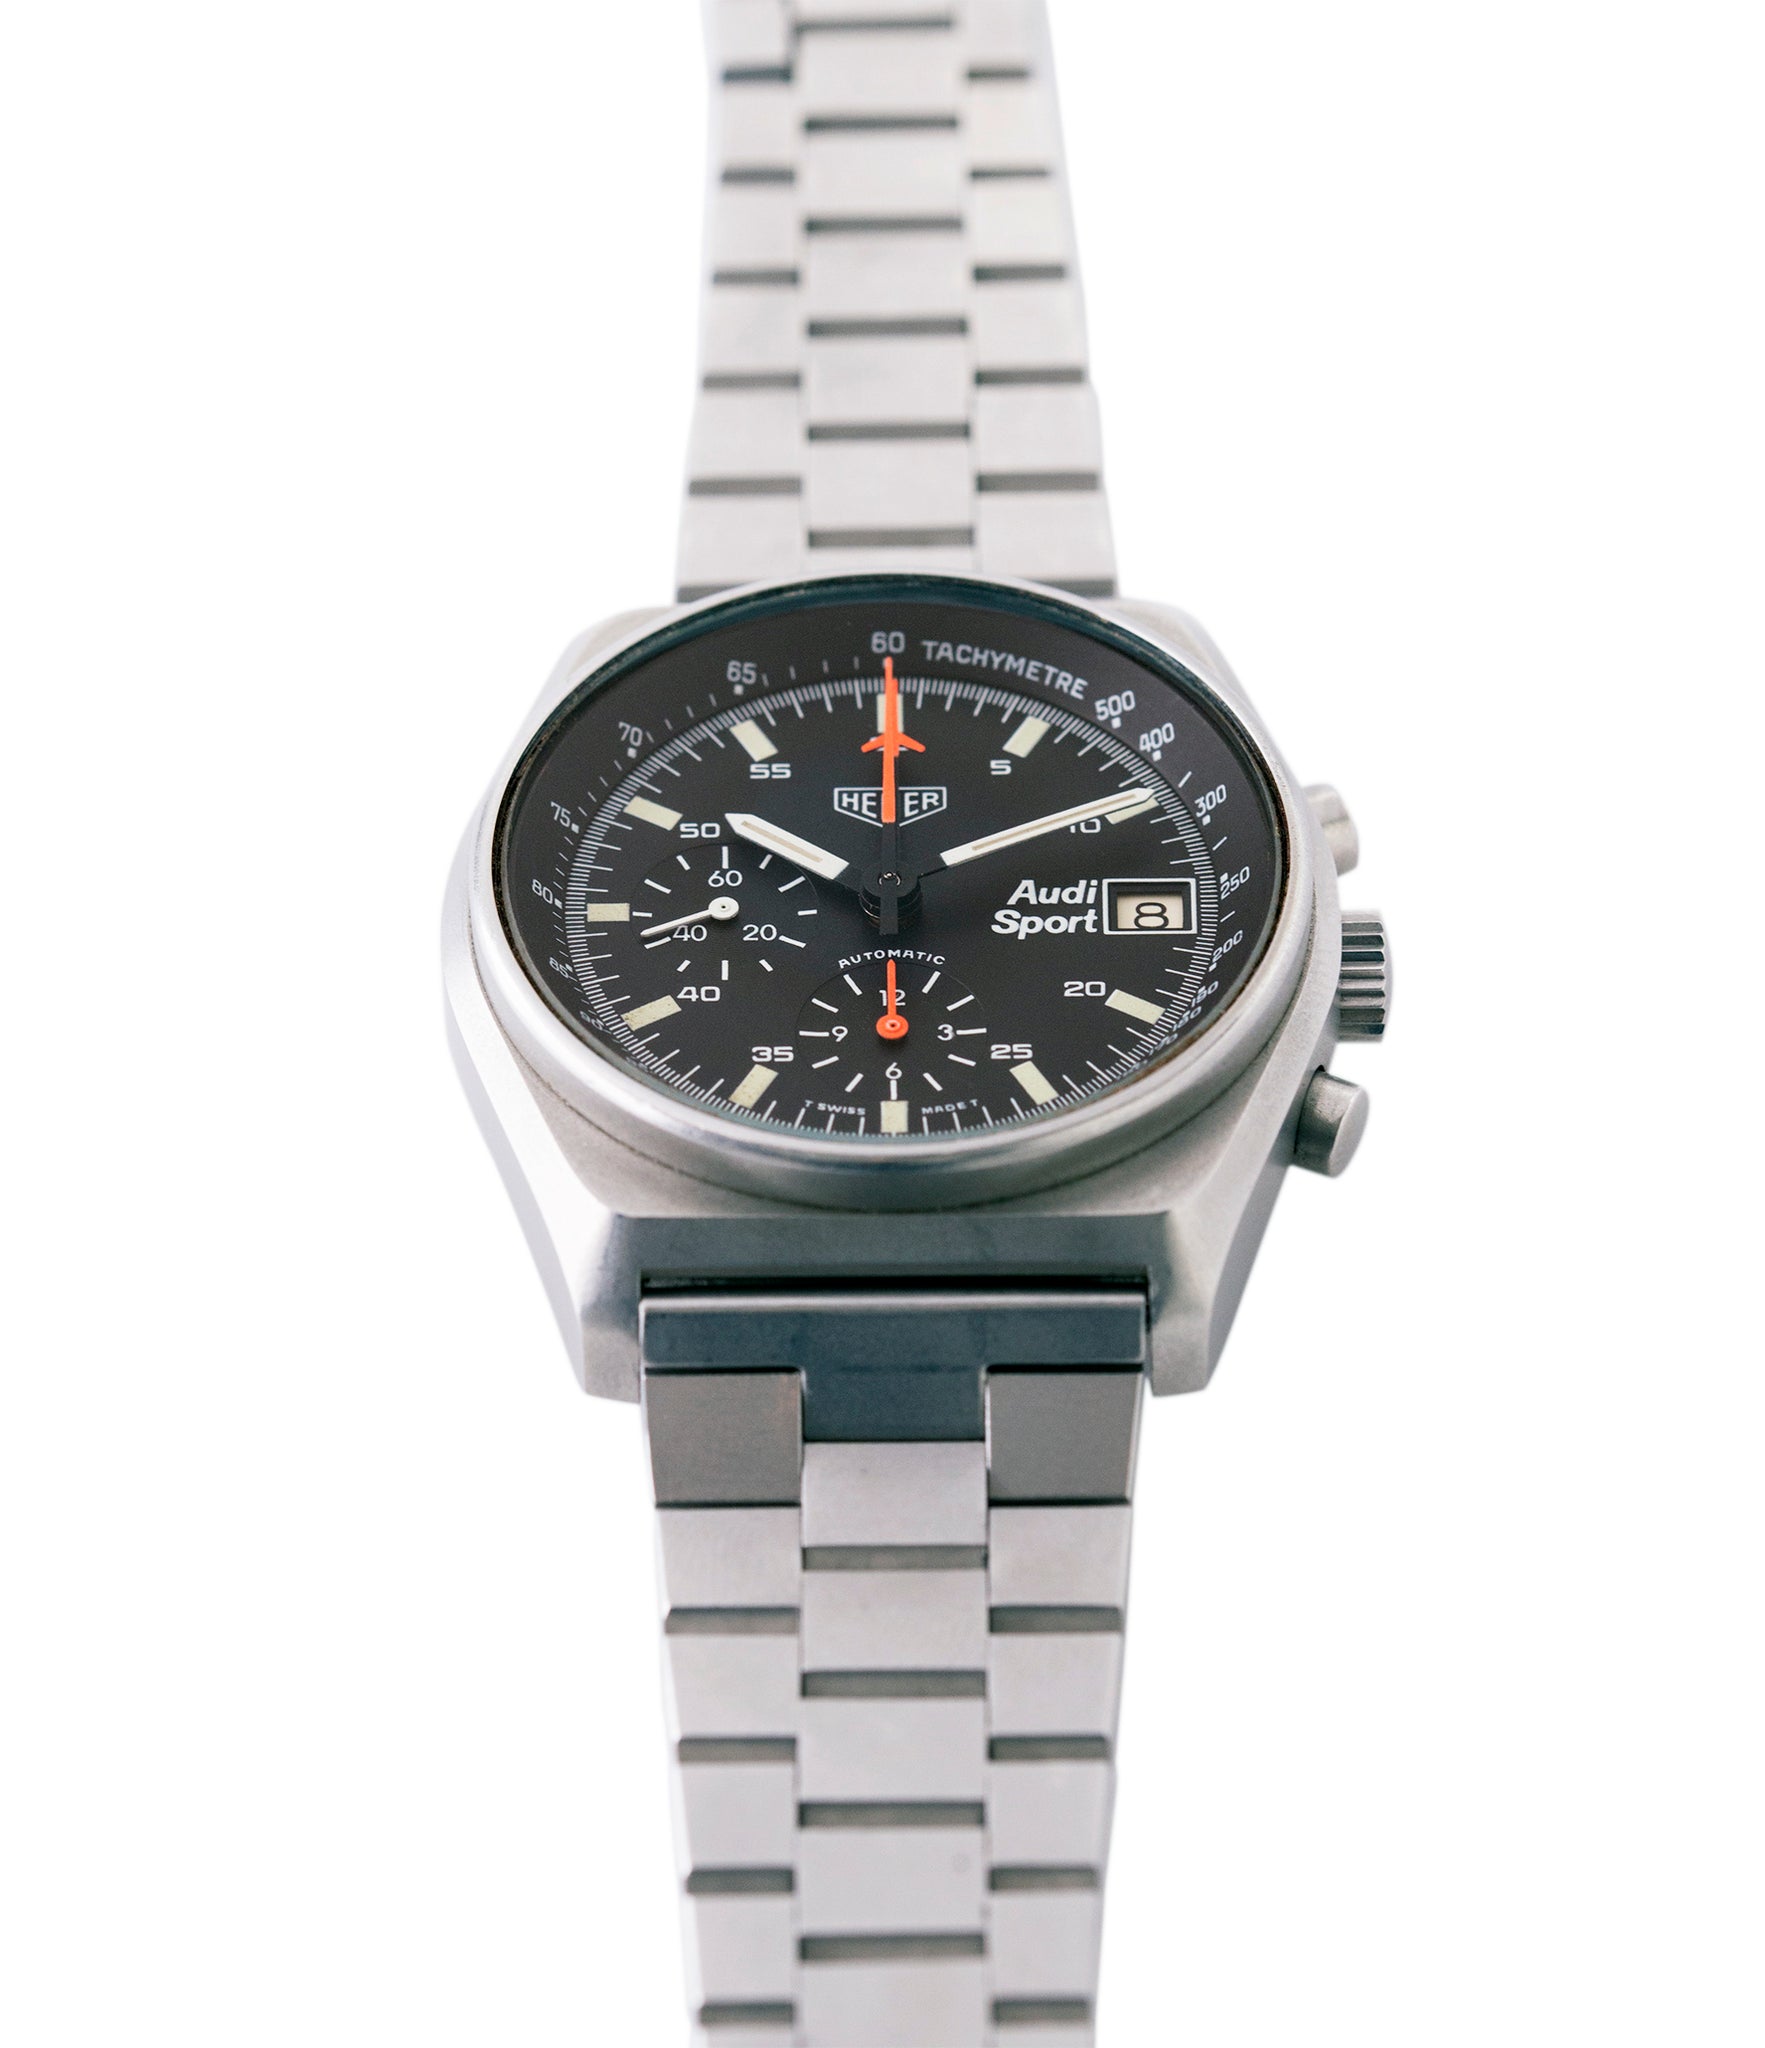 vintage sport chronograph Heuer Sport Audi 510.533 vintage steel chronograph watch for sale online at A Collected Man London UK specialist of rare vintage watches